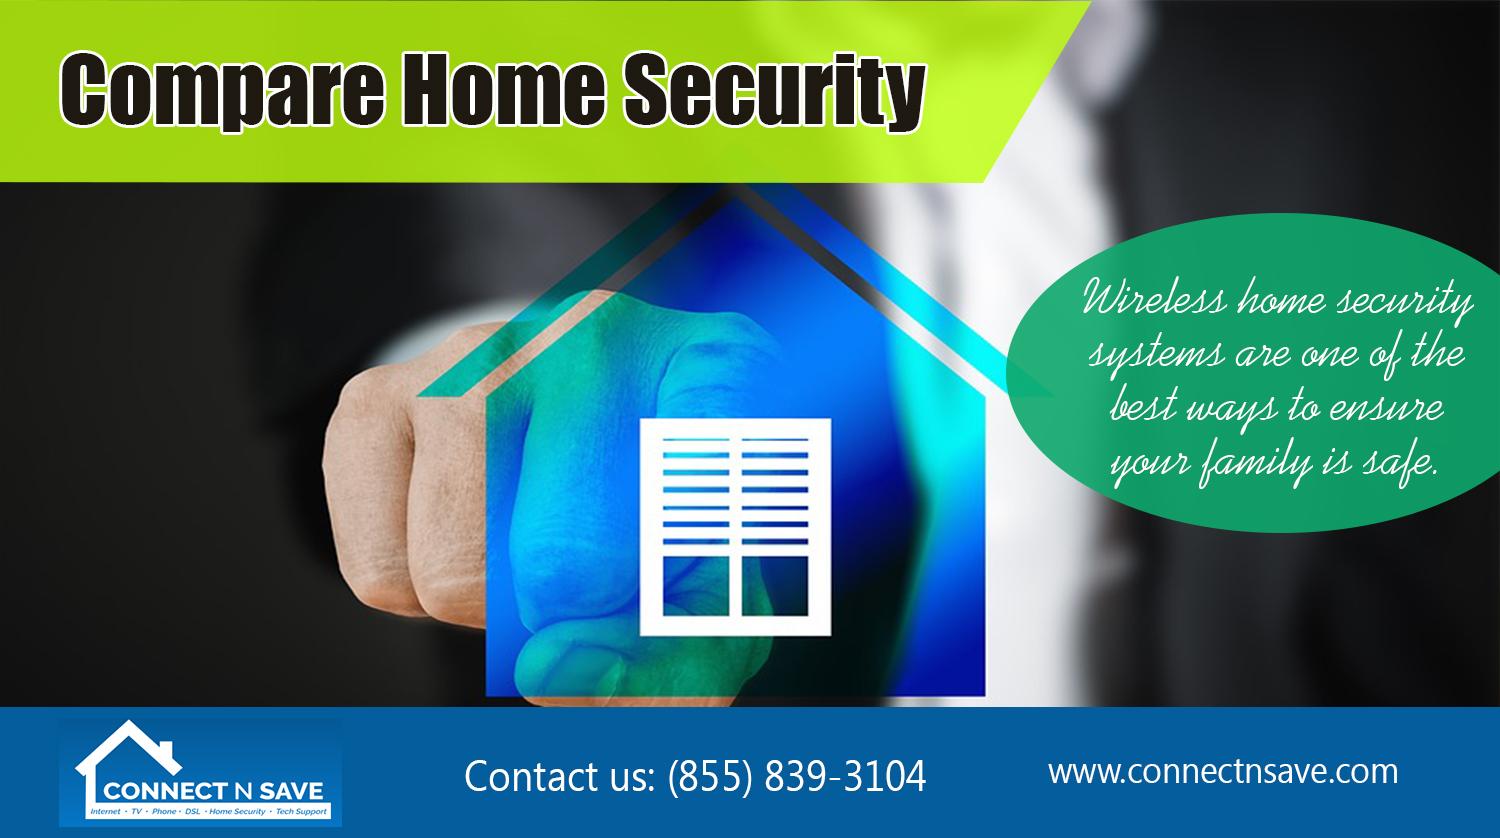 Compare Home Security (2) | http://connectnsave.com/